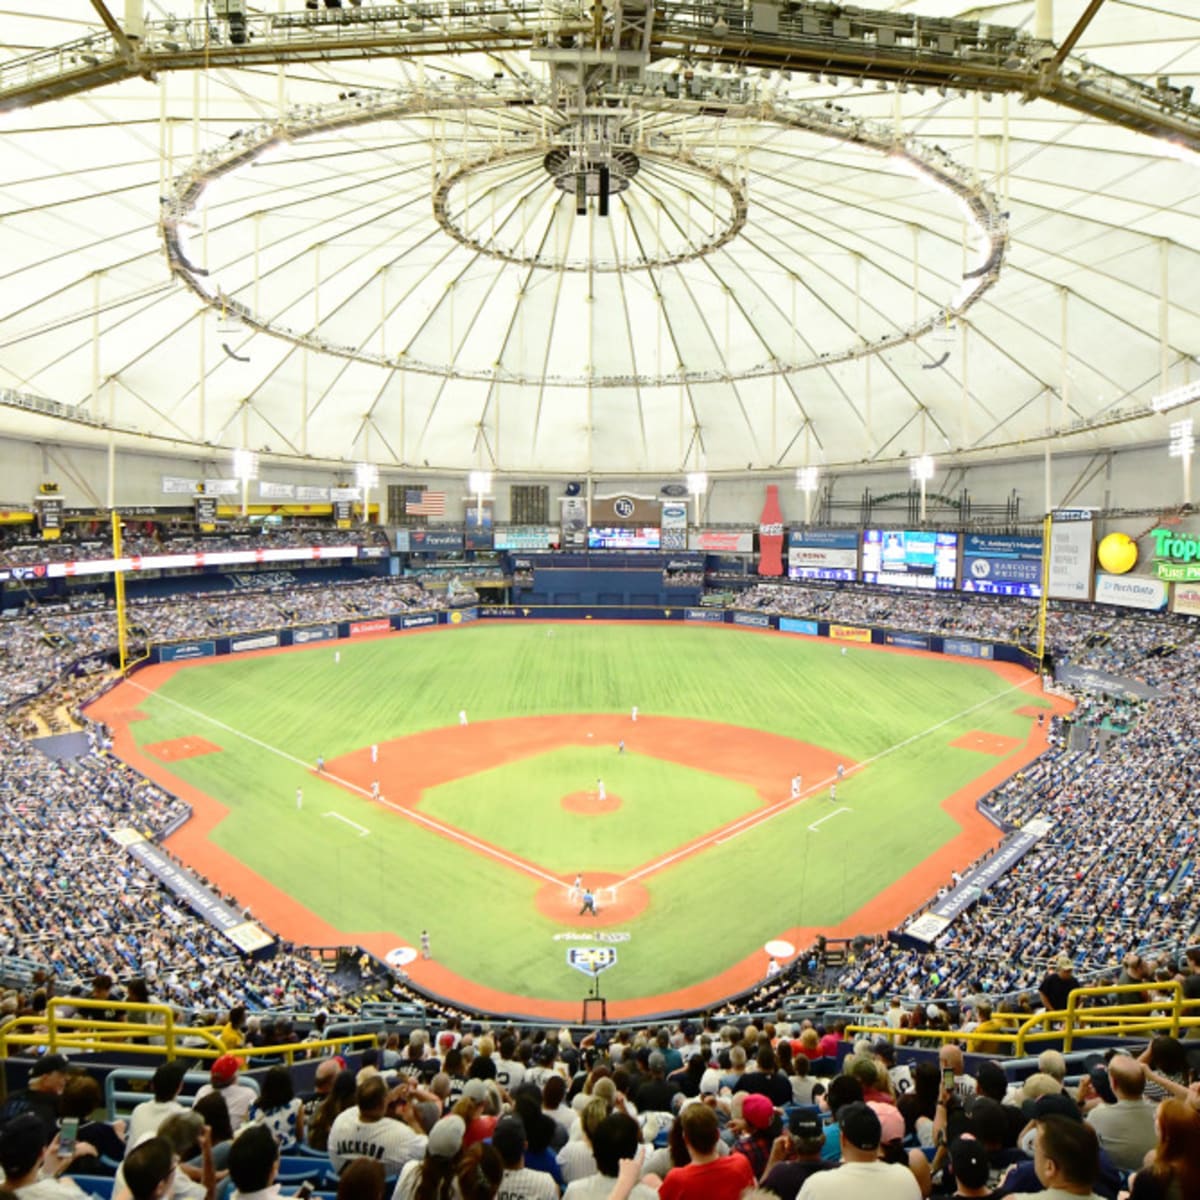 If the Rays replace Tropicana Field, where will fans park?